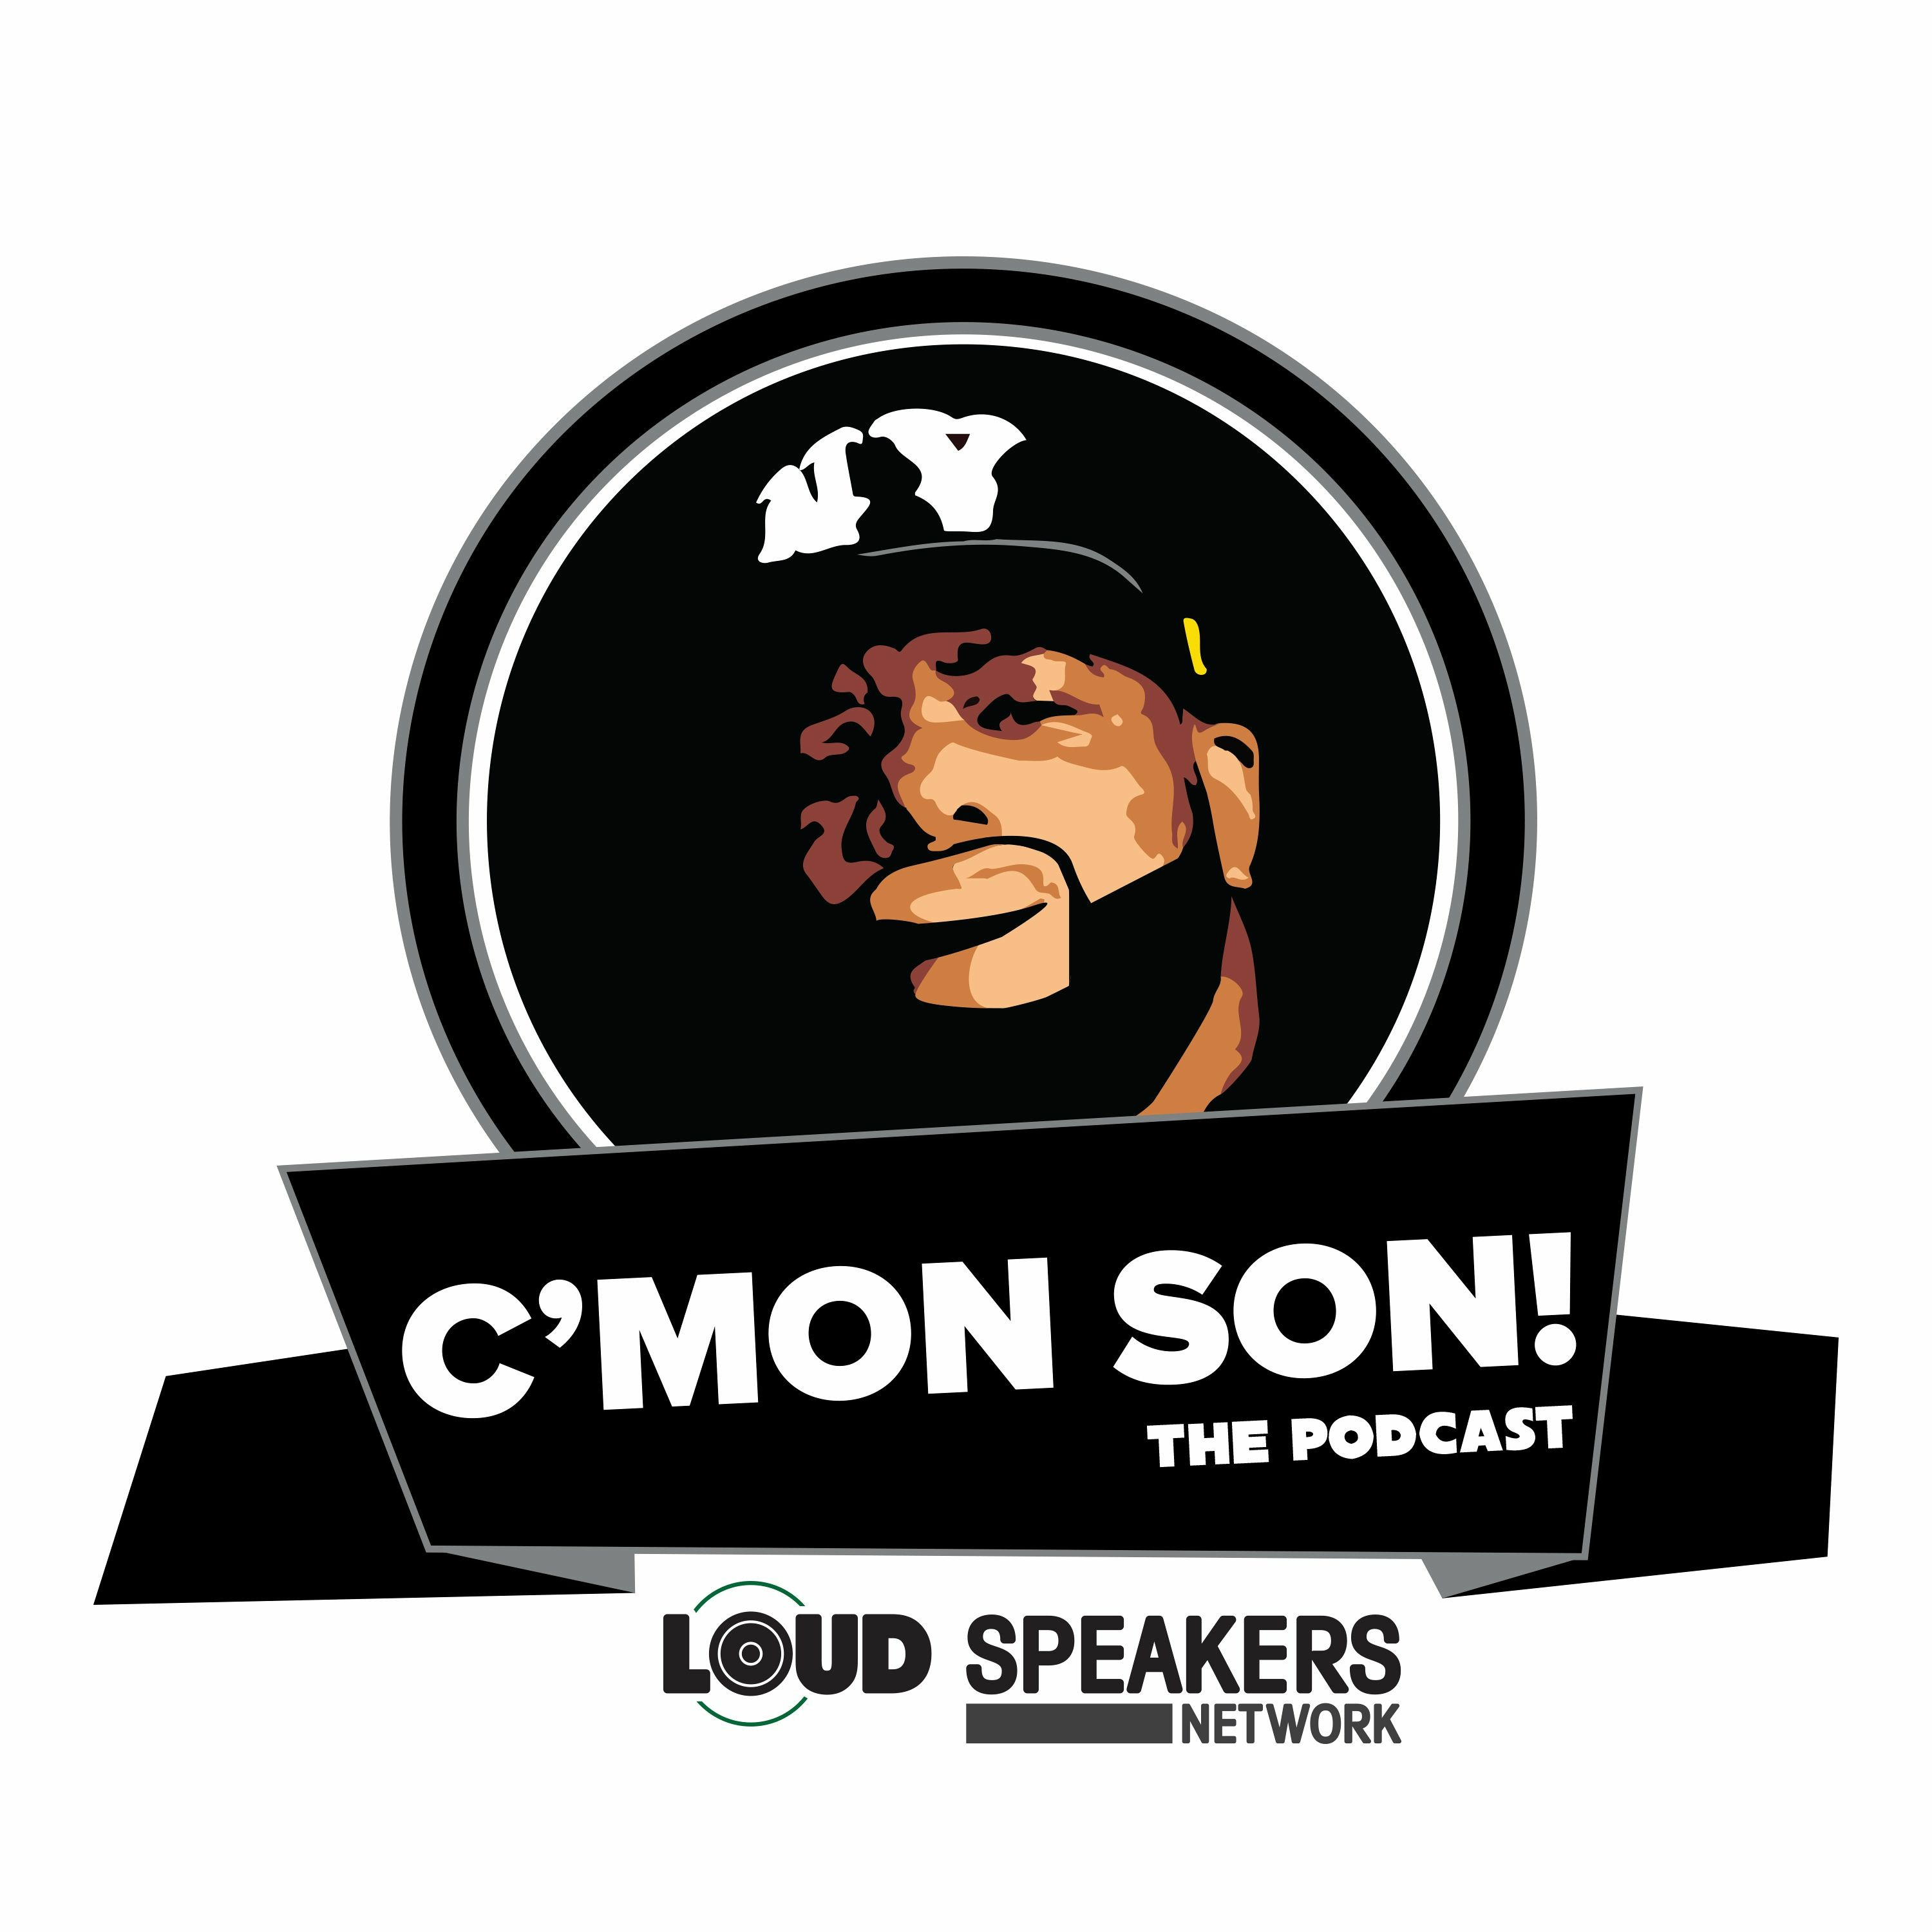 C'Mon Son! The Podcast Series 7 Episode #76: Fighting For Your Rights & Systematic Oppression